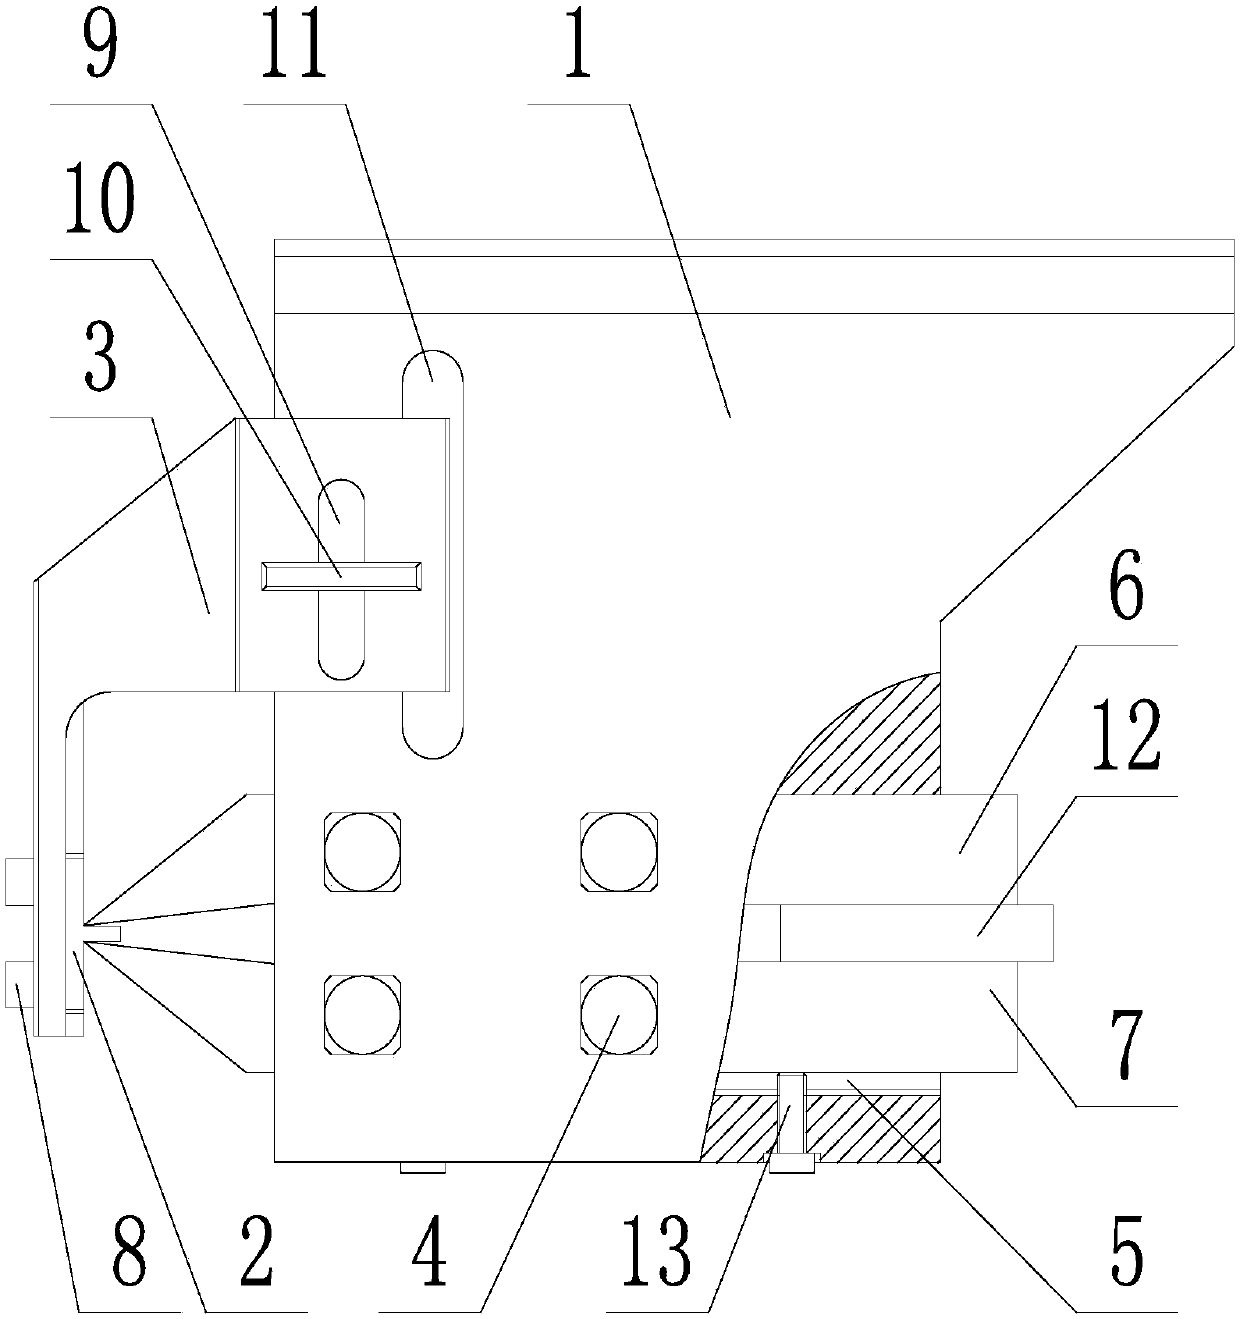 Double-sided turning cutting tool clamping mechanism and method for thin-wall uniform-thickness parts